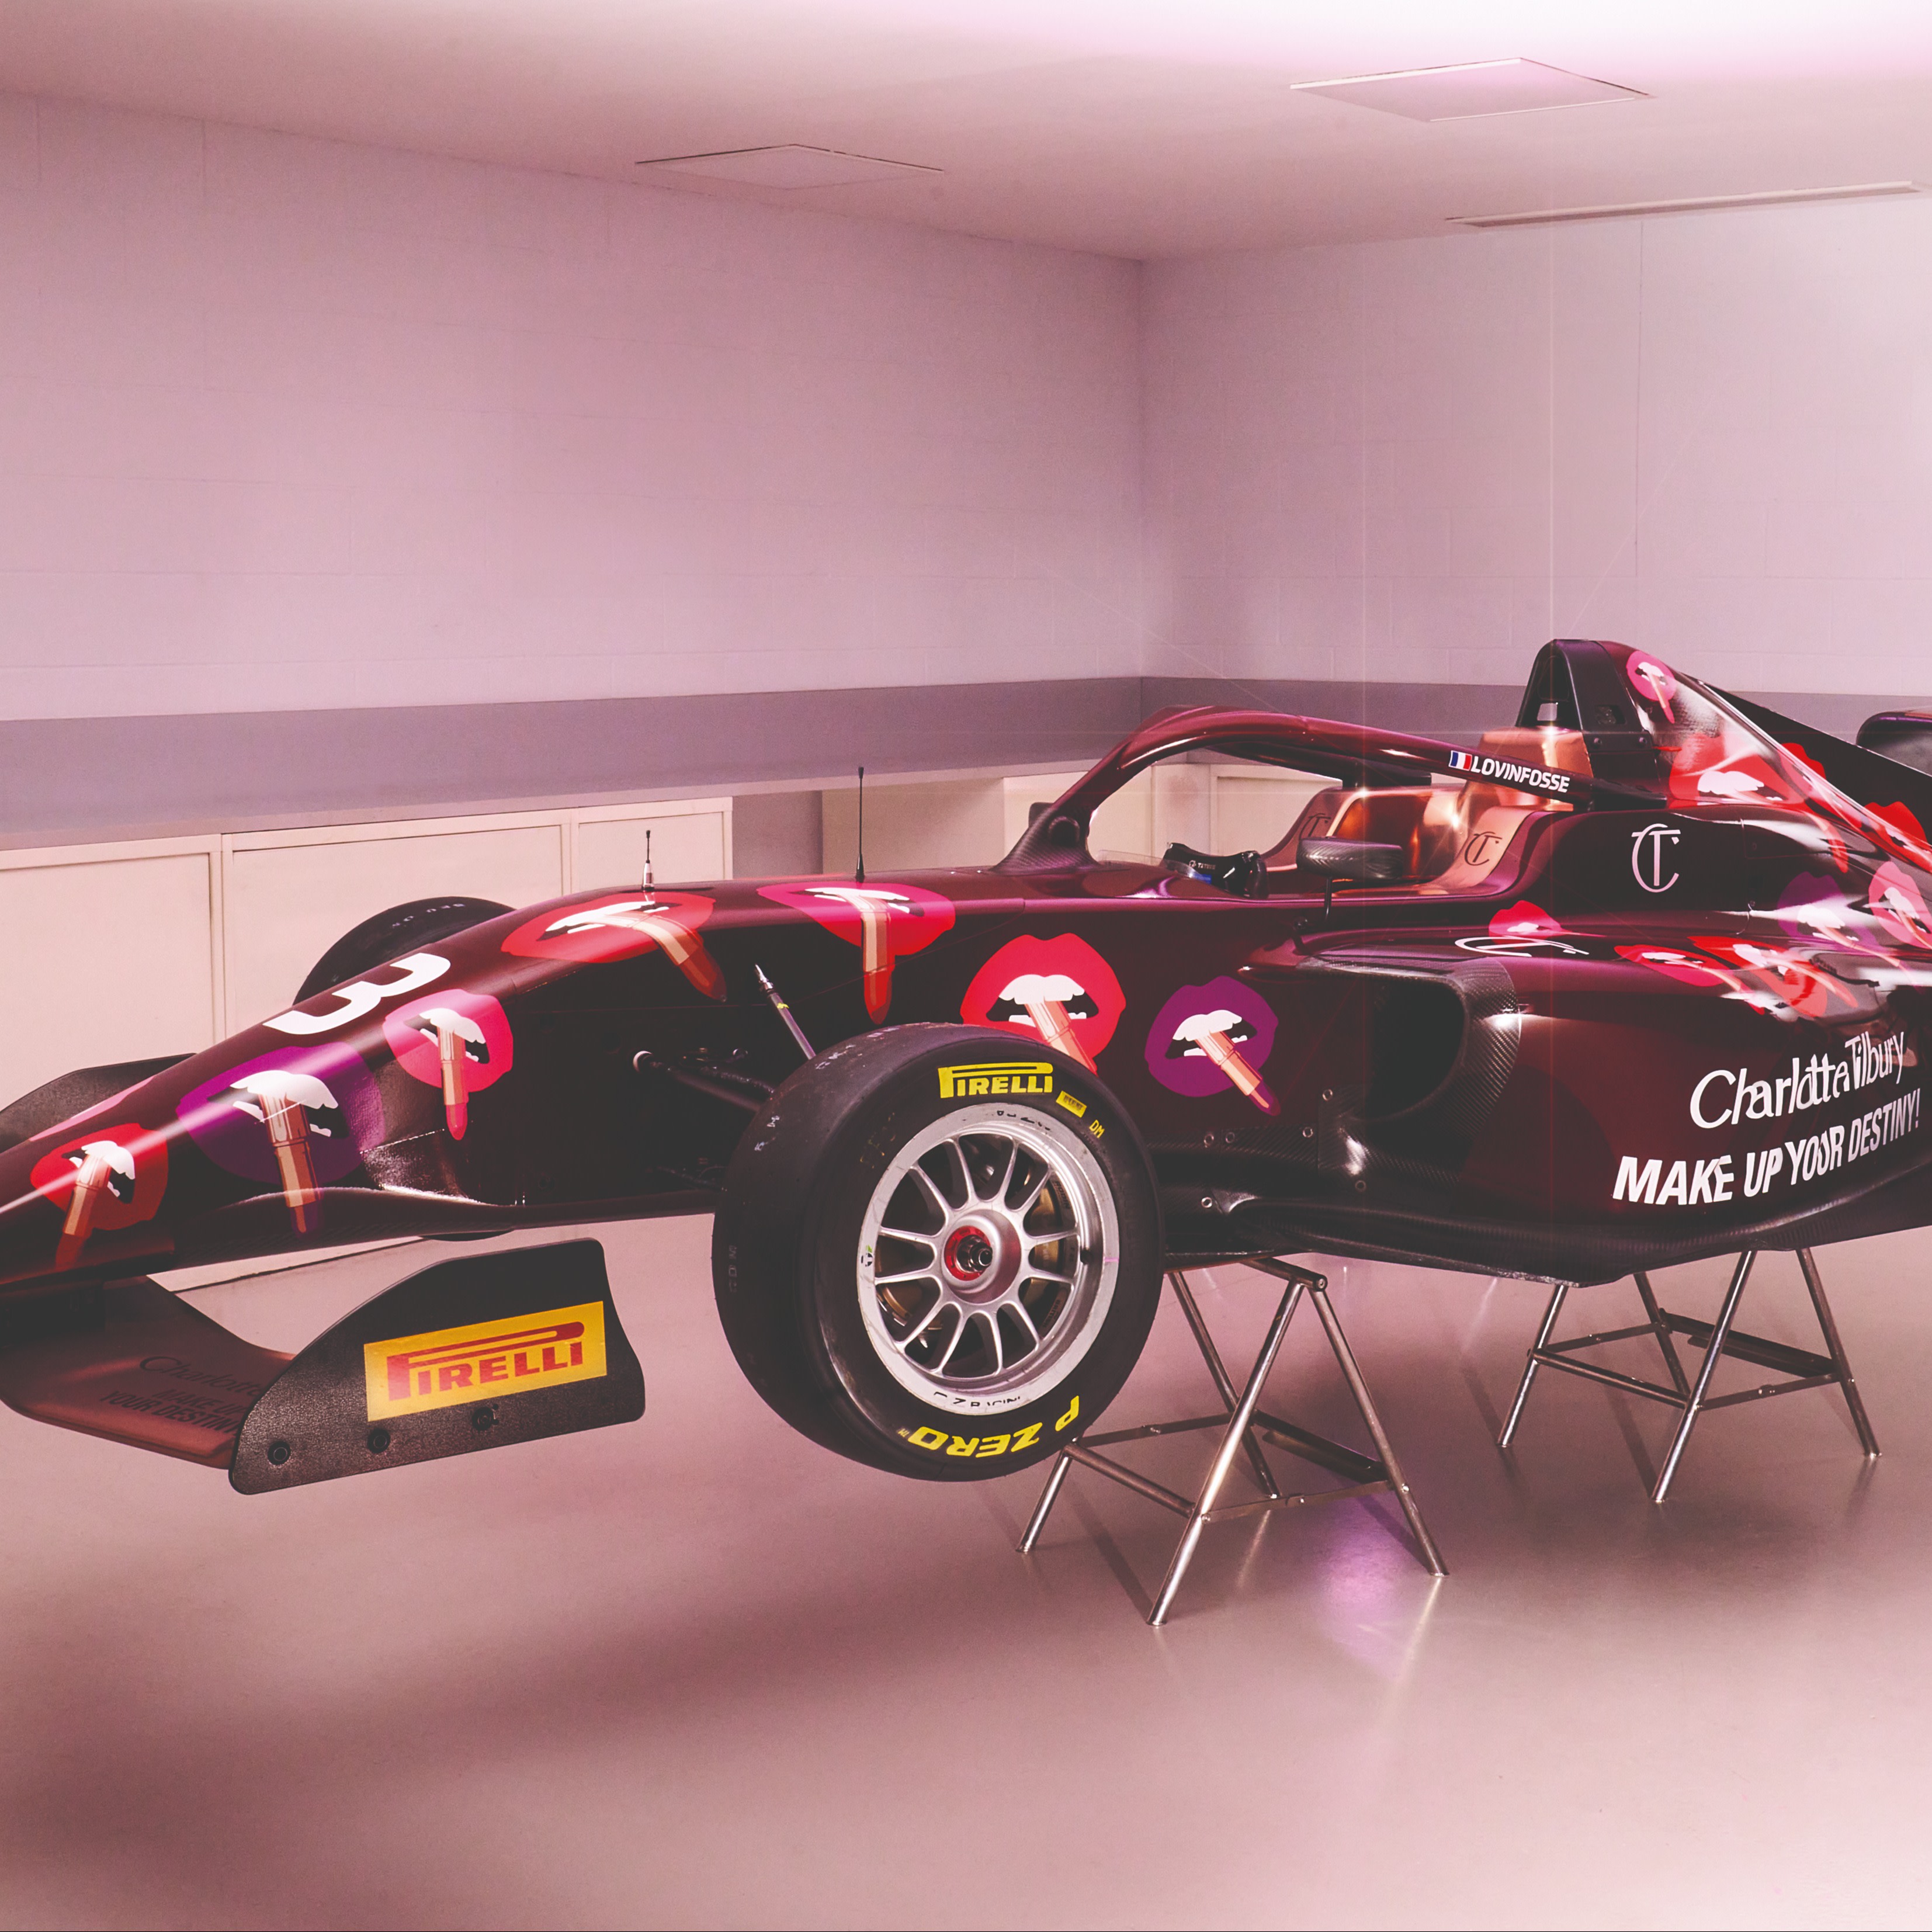 Charlotte Tilbury x F1 Academy branded car with Hot Lips print